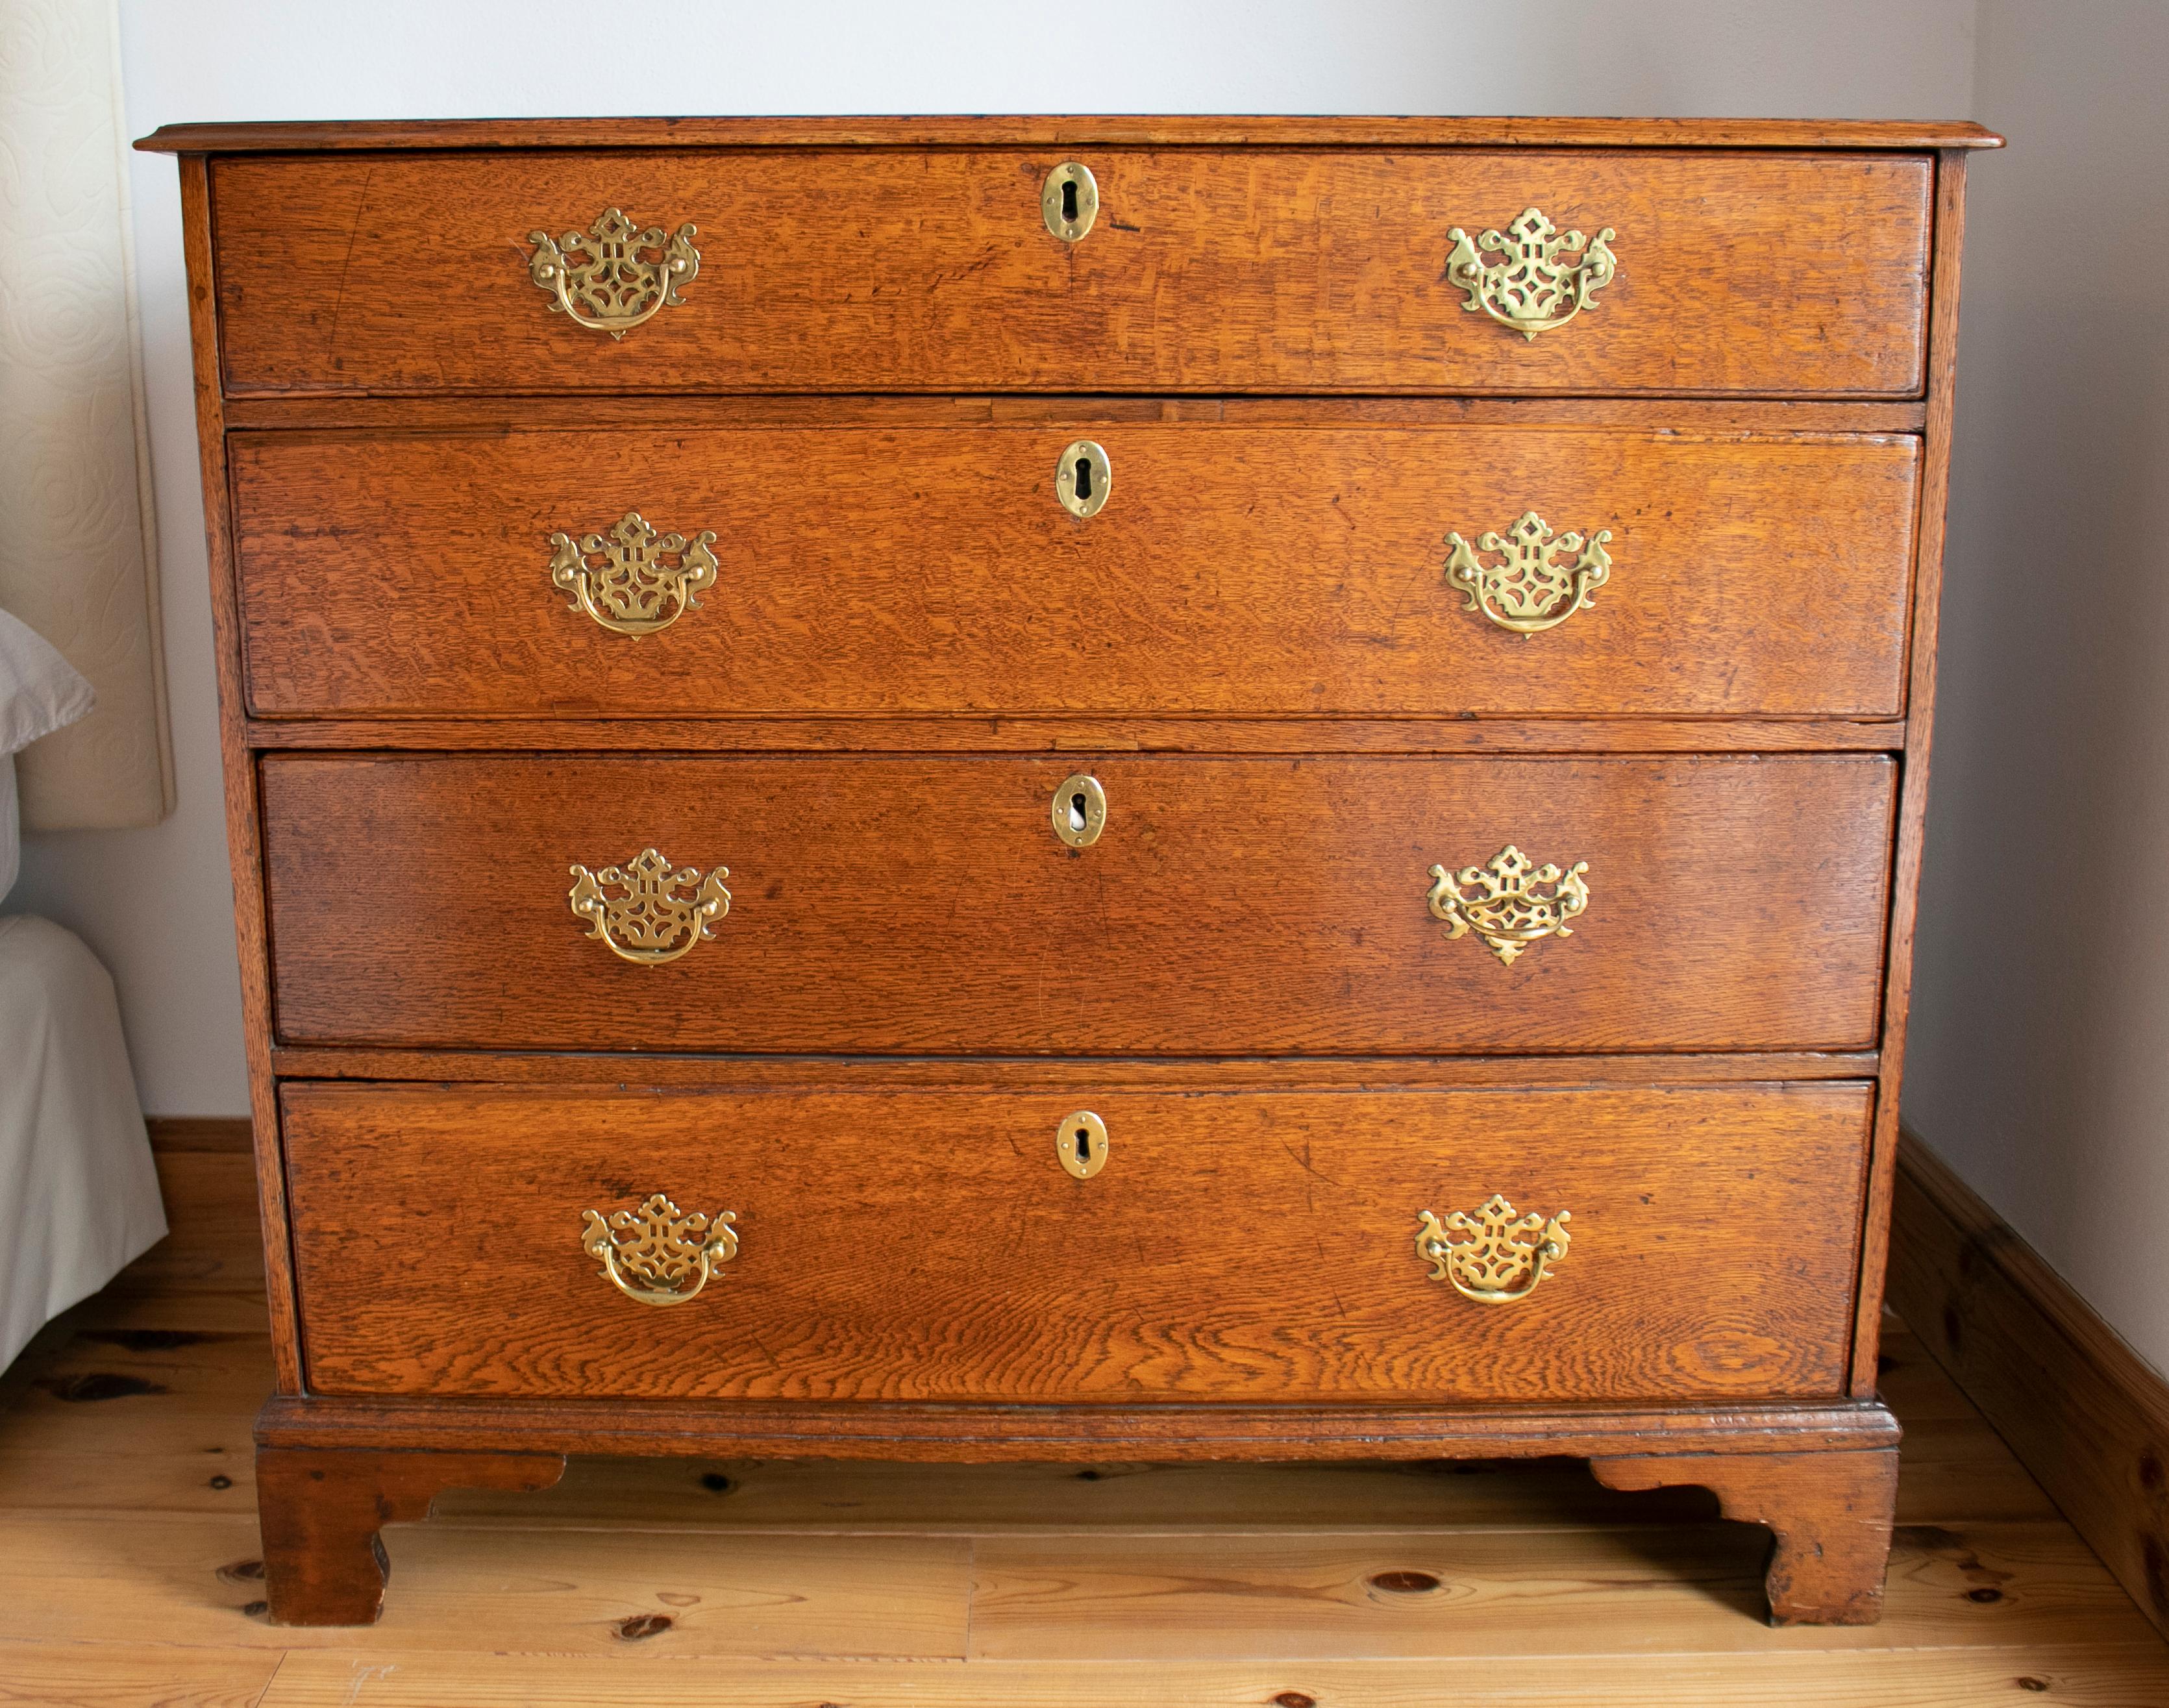 19th century English oakwood four-drawer chest with bronze fittings.